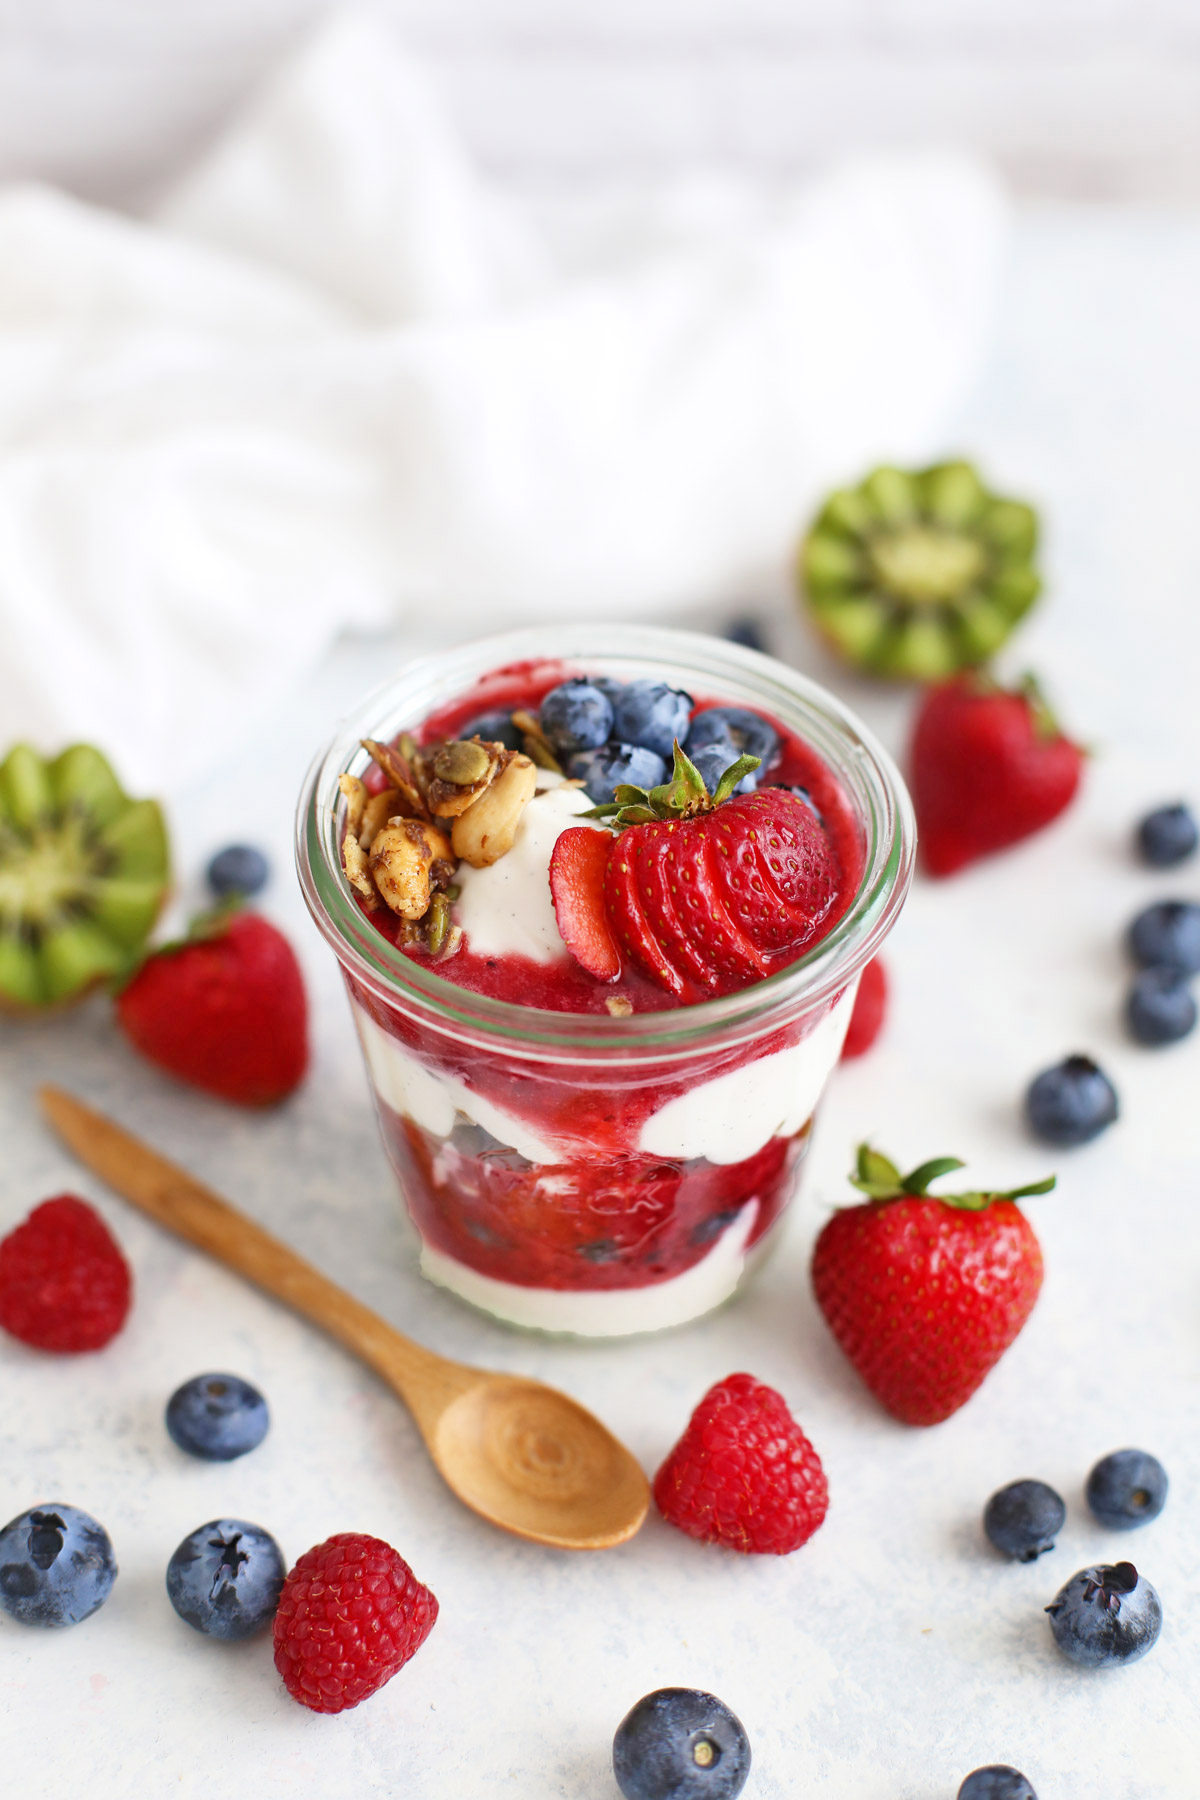 Paleo parfait in a jar with coconut milk yogurt, strawberry puree, and grain-free granola, with fresh fruit scattered in the background.